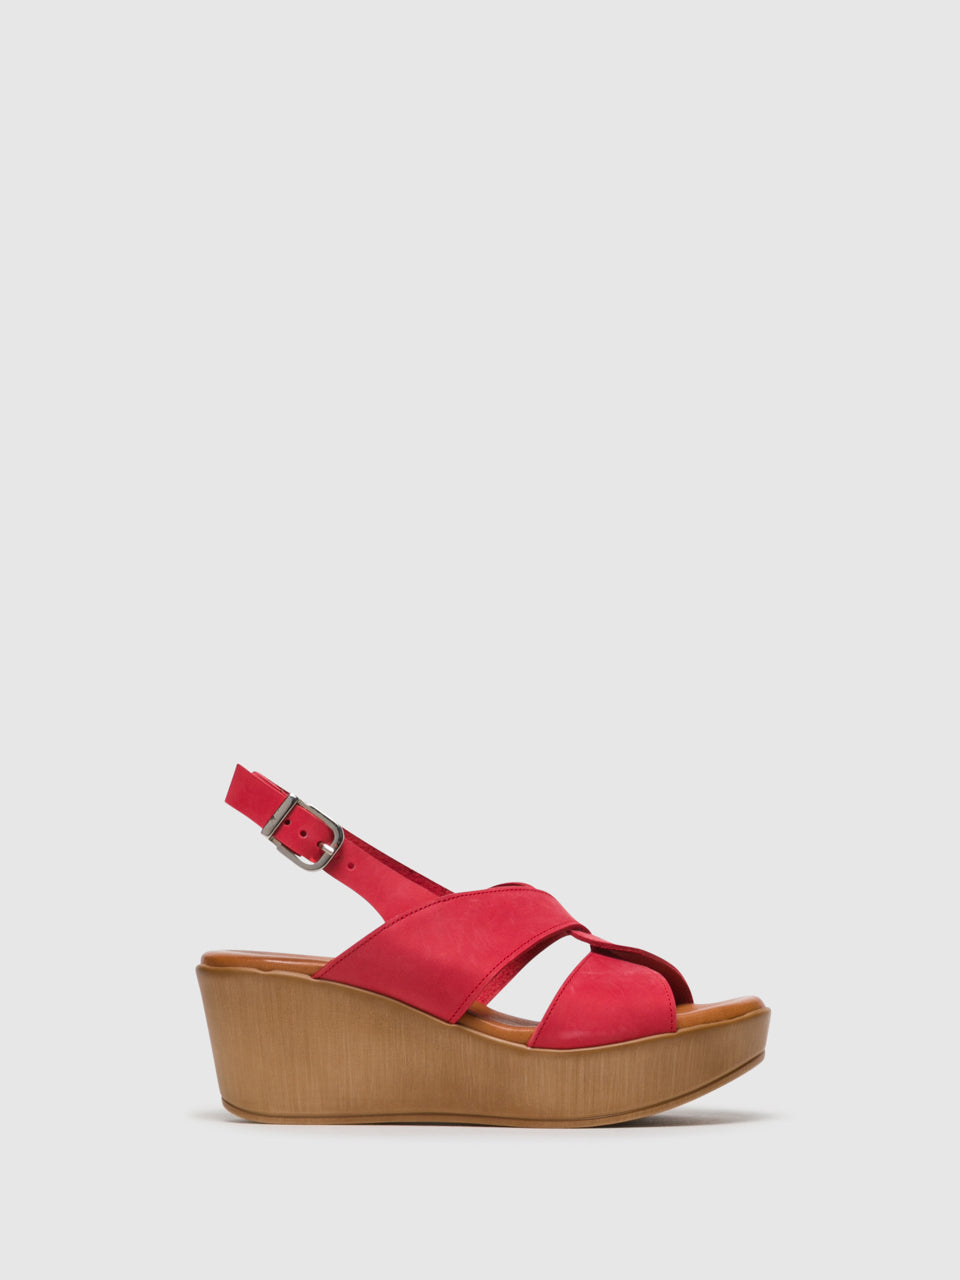 Foreva Red Buckle Sandals